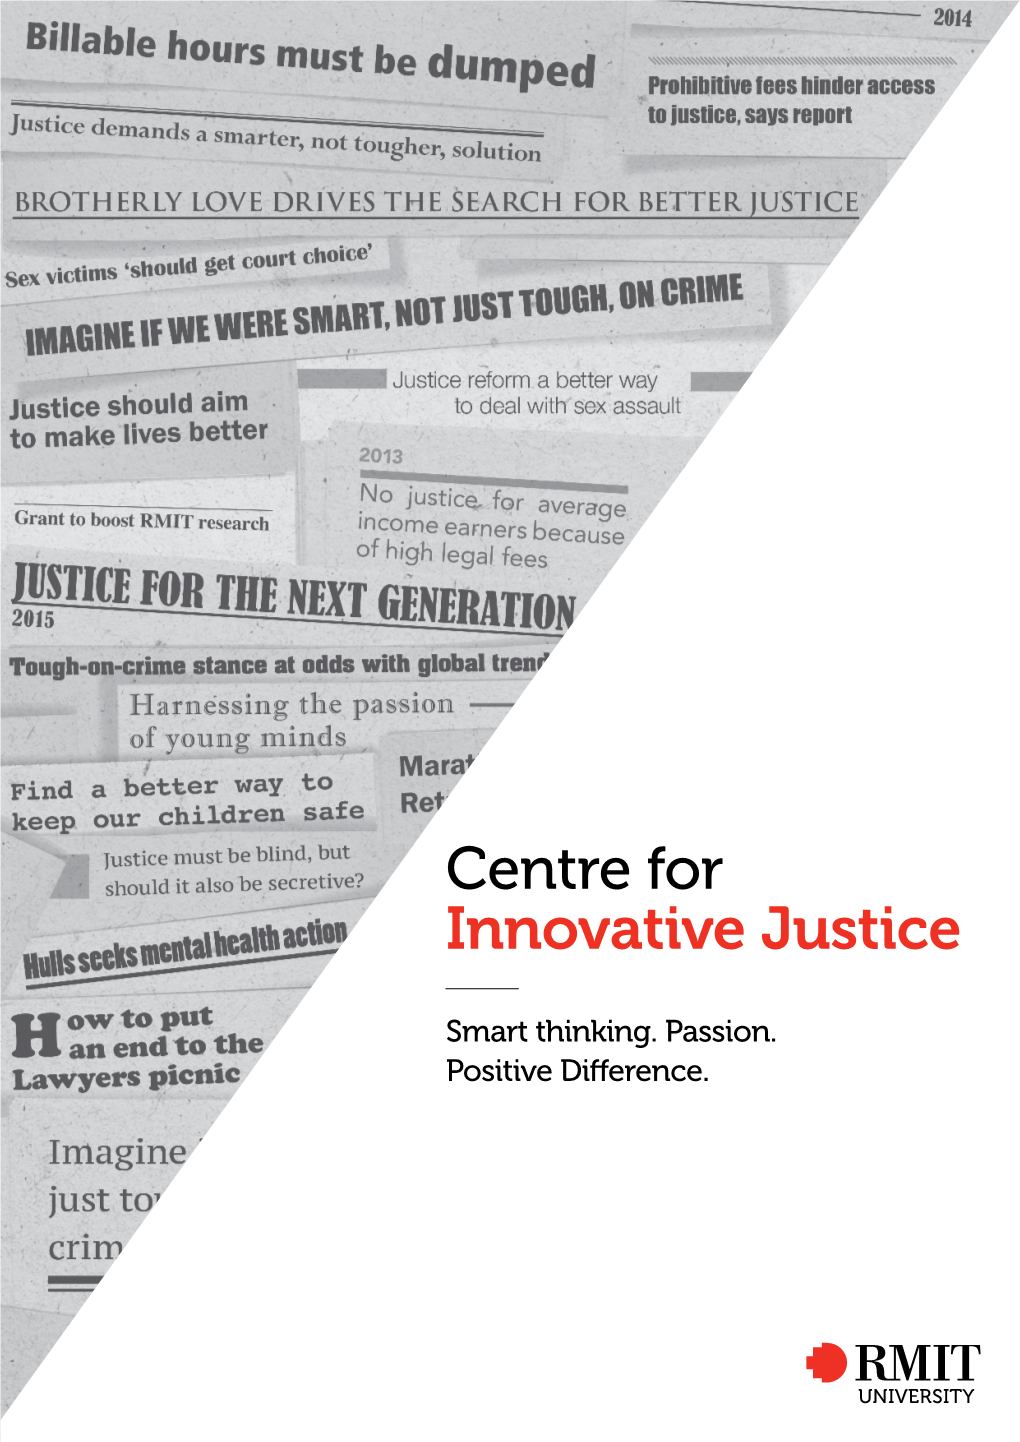 Centre for Innovative Justice